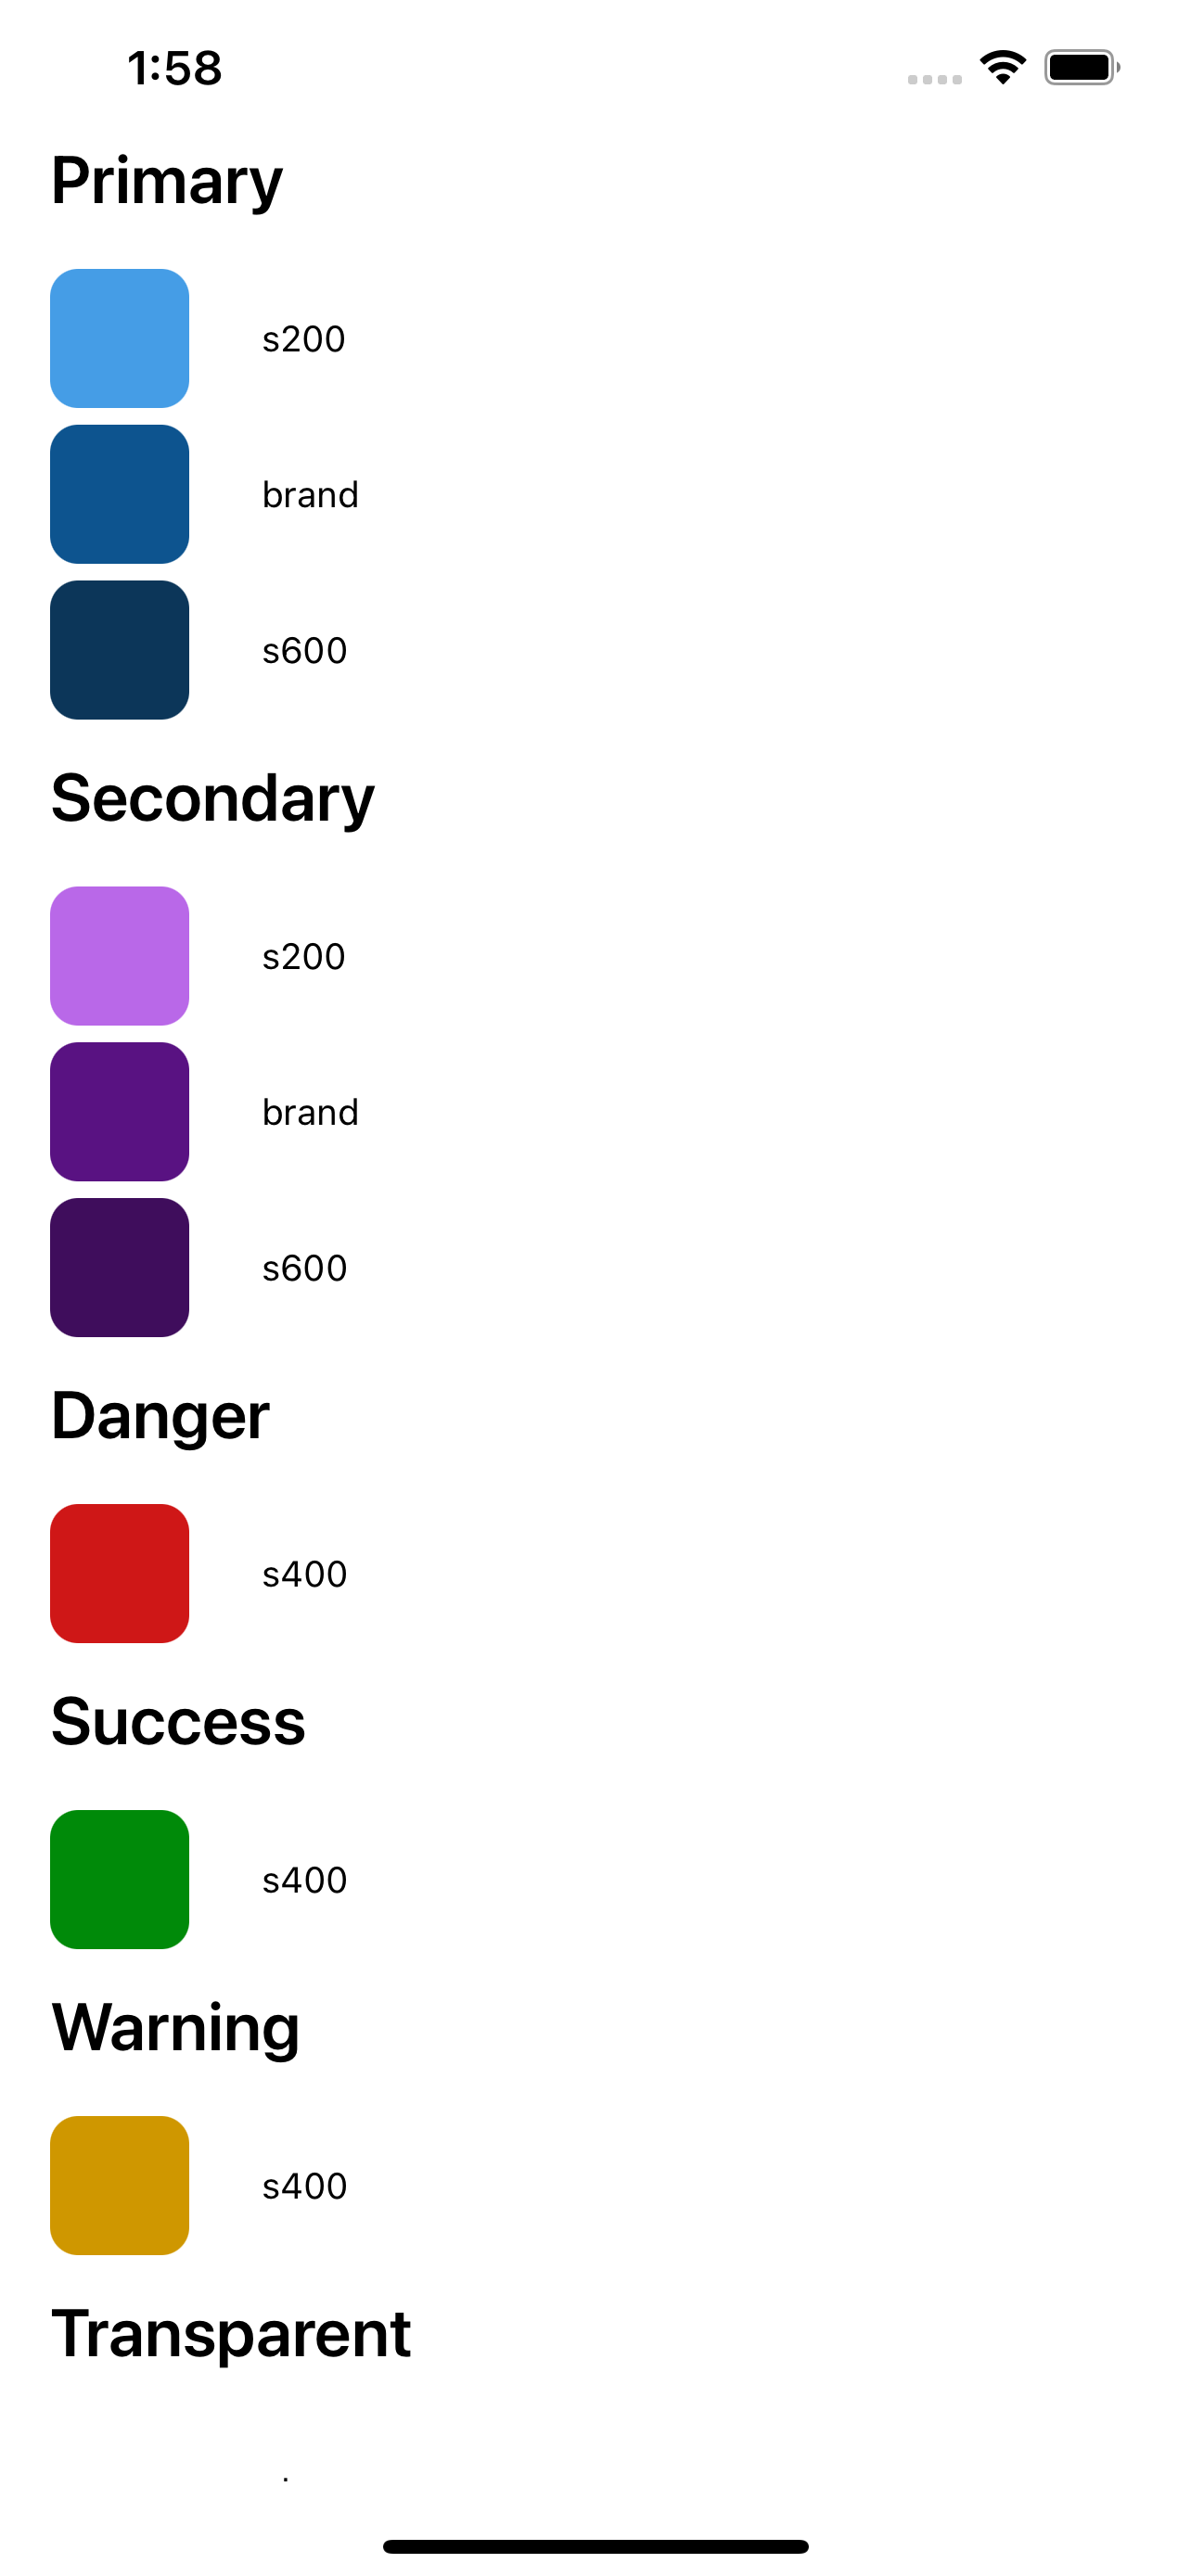 A section of the app, showing a list of primary and secondary colors.